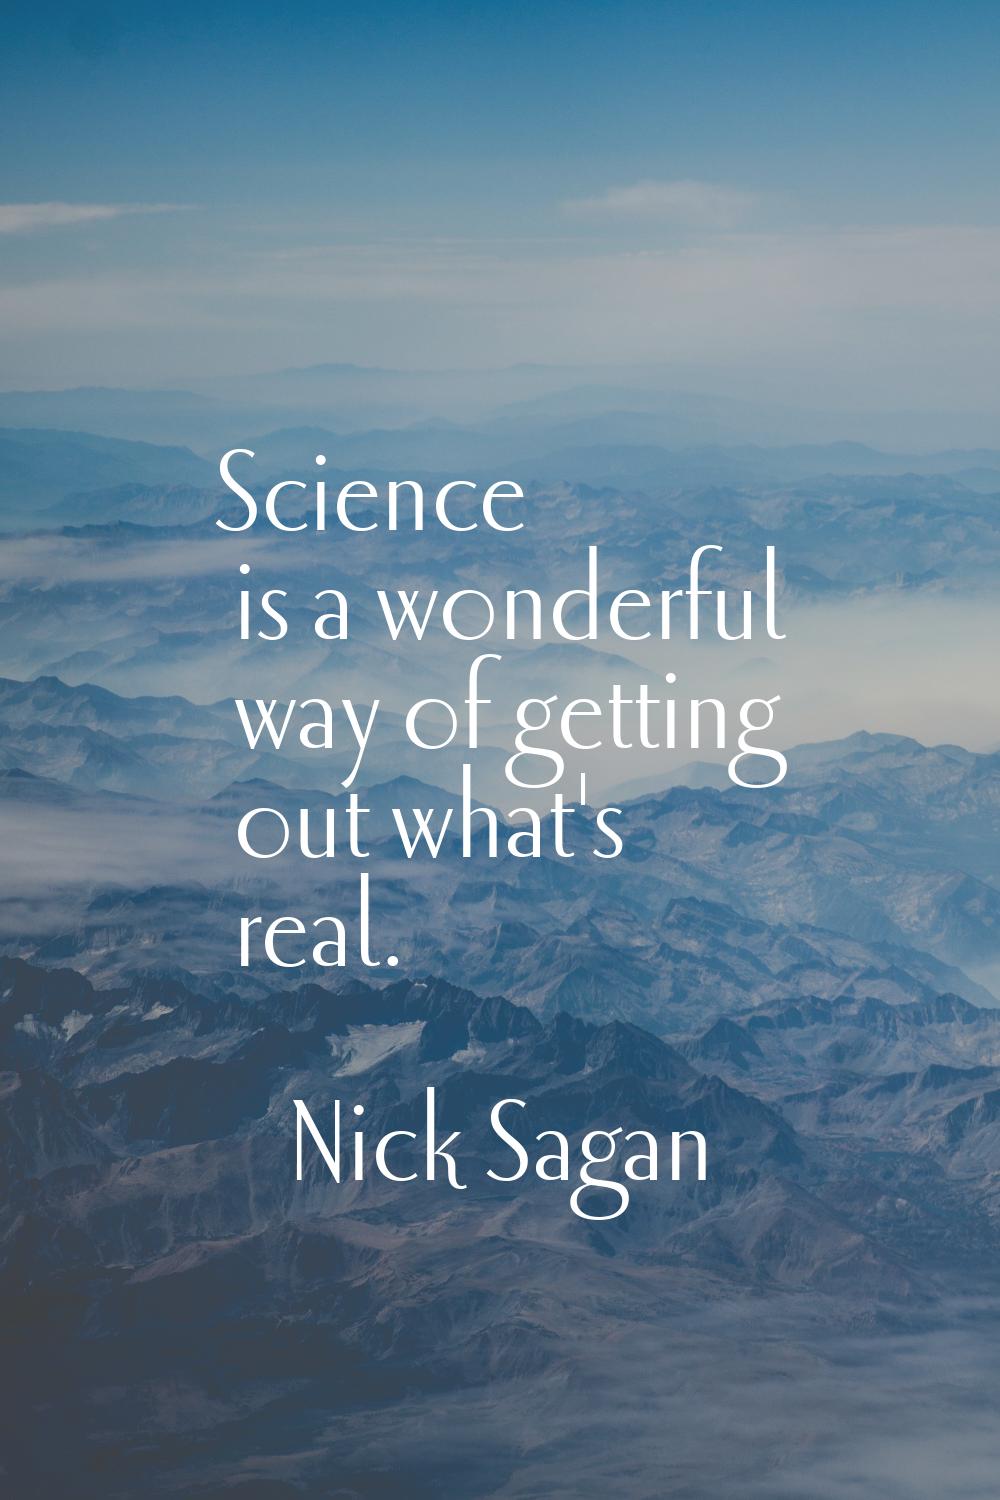 Science is a wonderful way of getting out what's real.